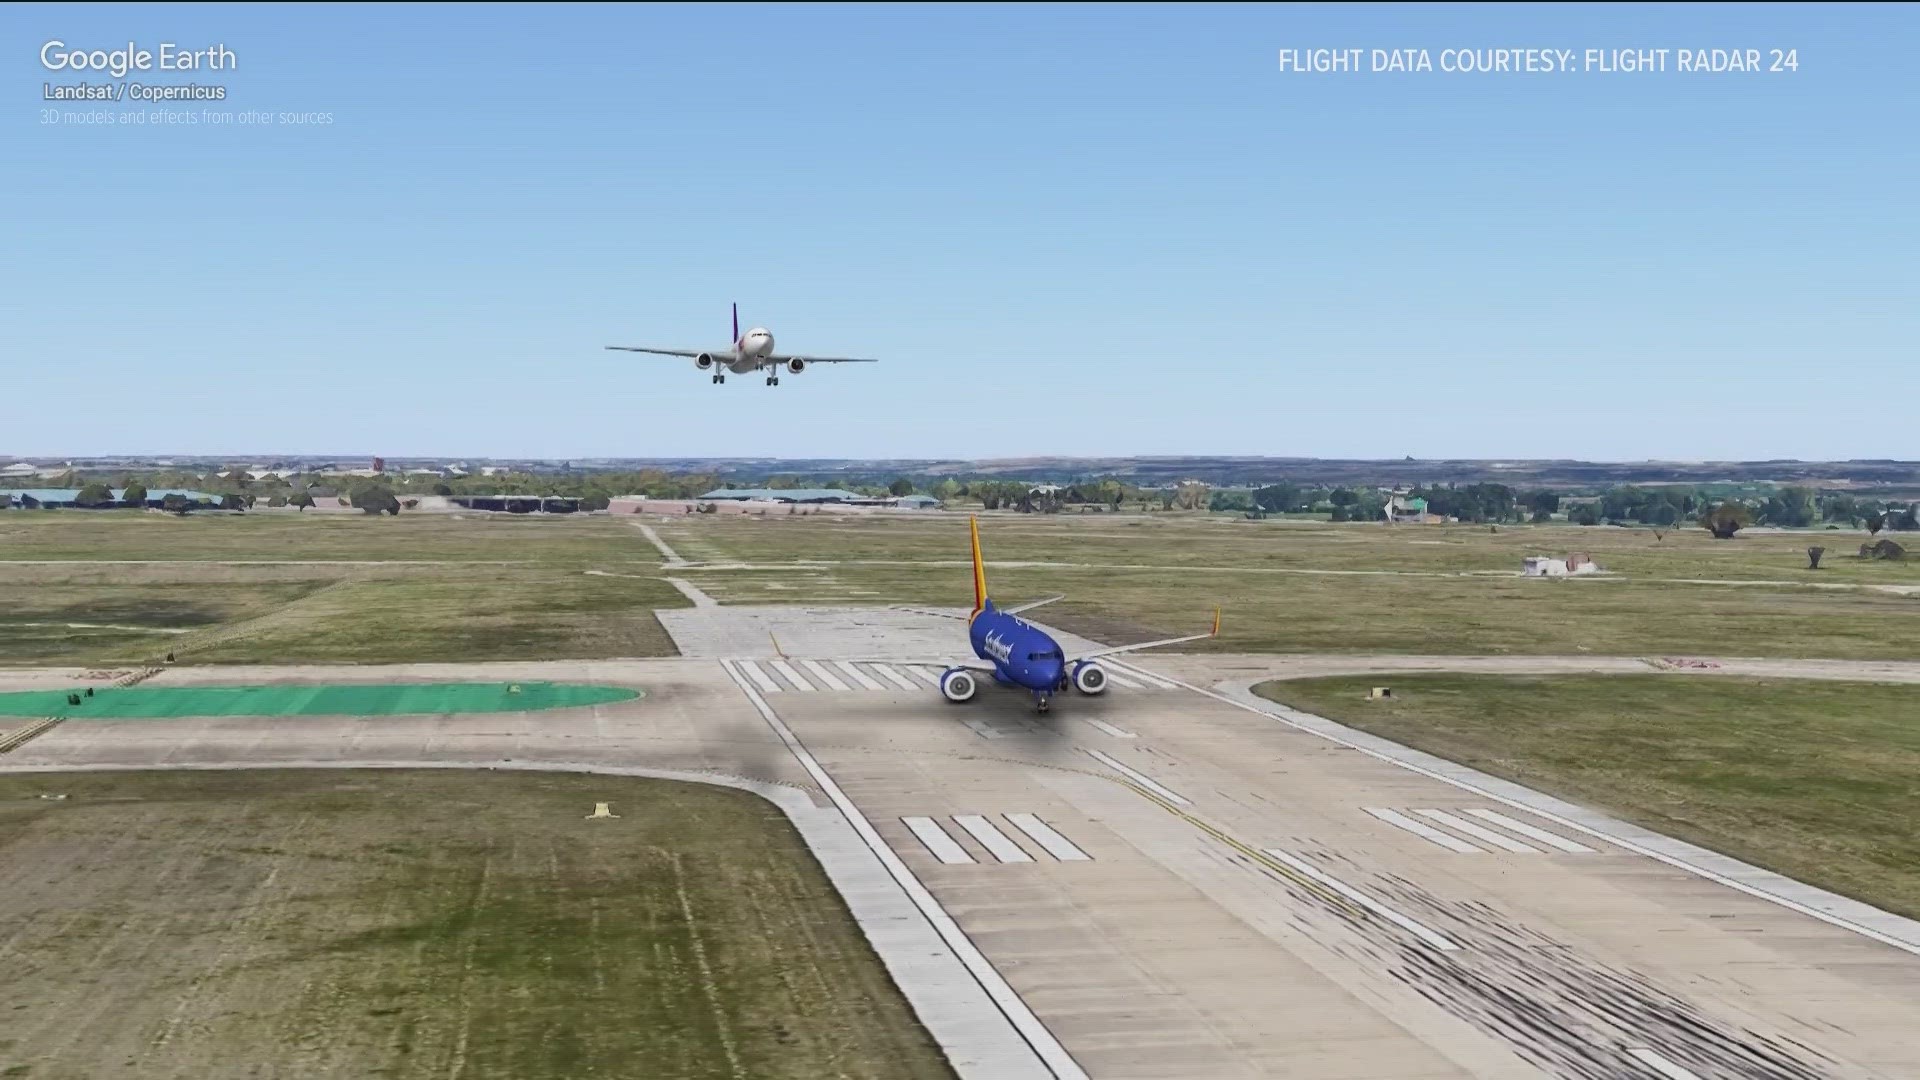 The move follows a number of incidents and close calls that have happened at Austin's airport in the last 14 months.